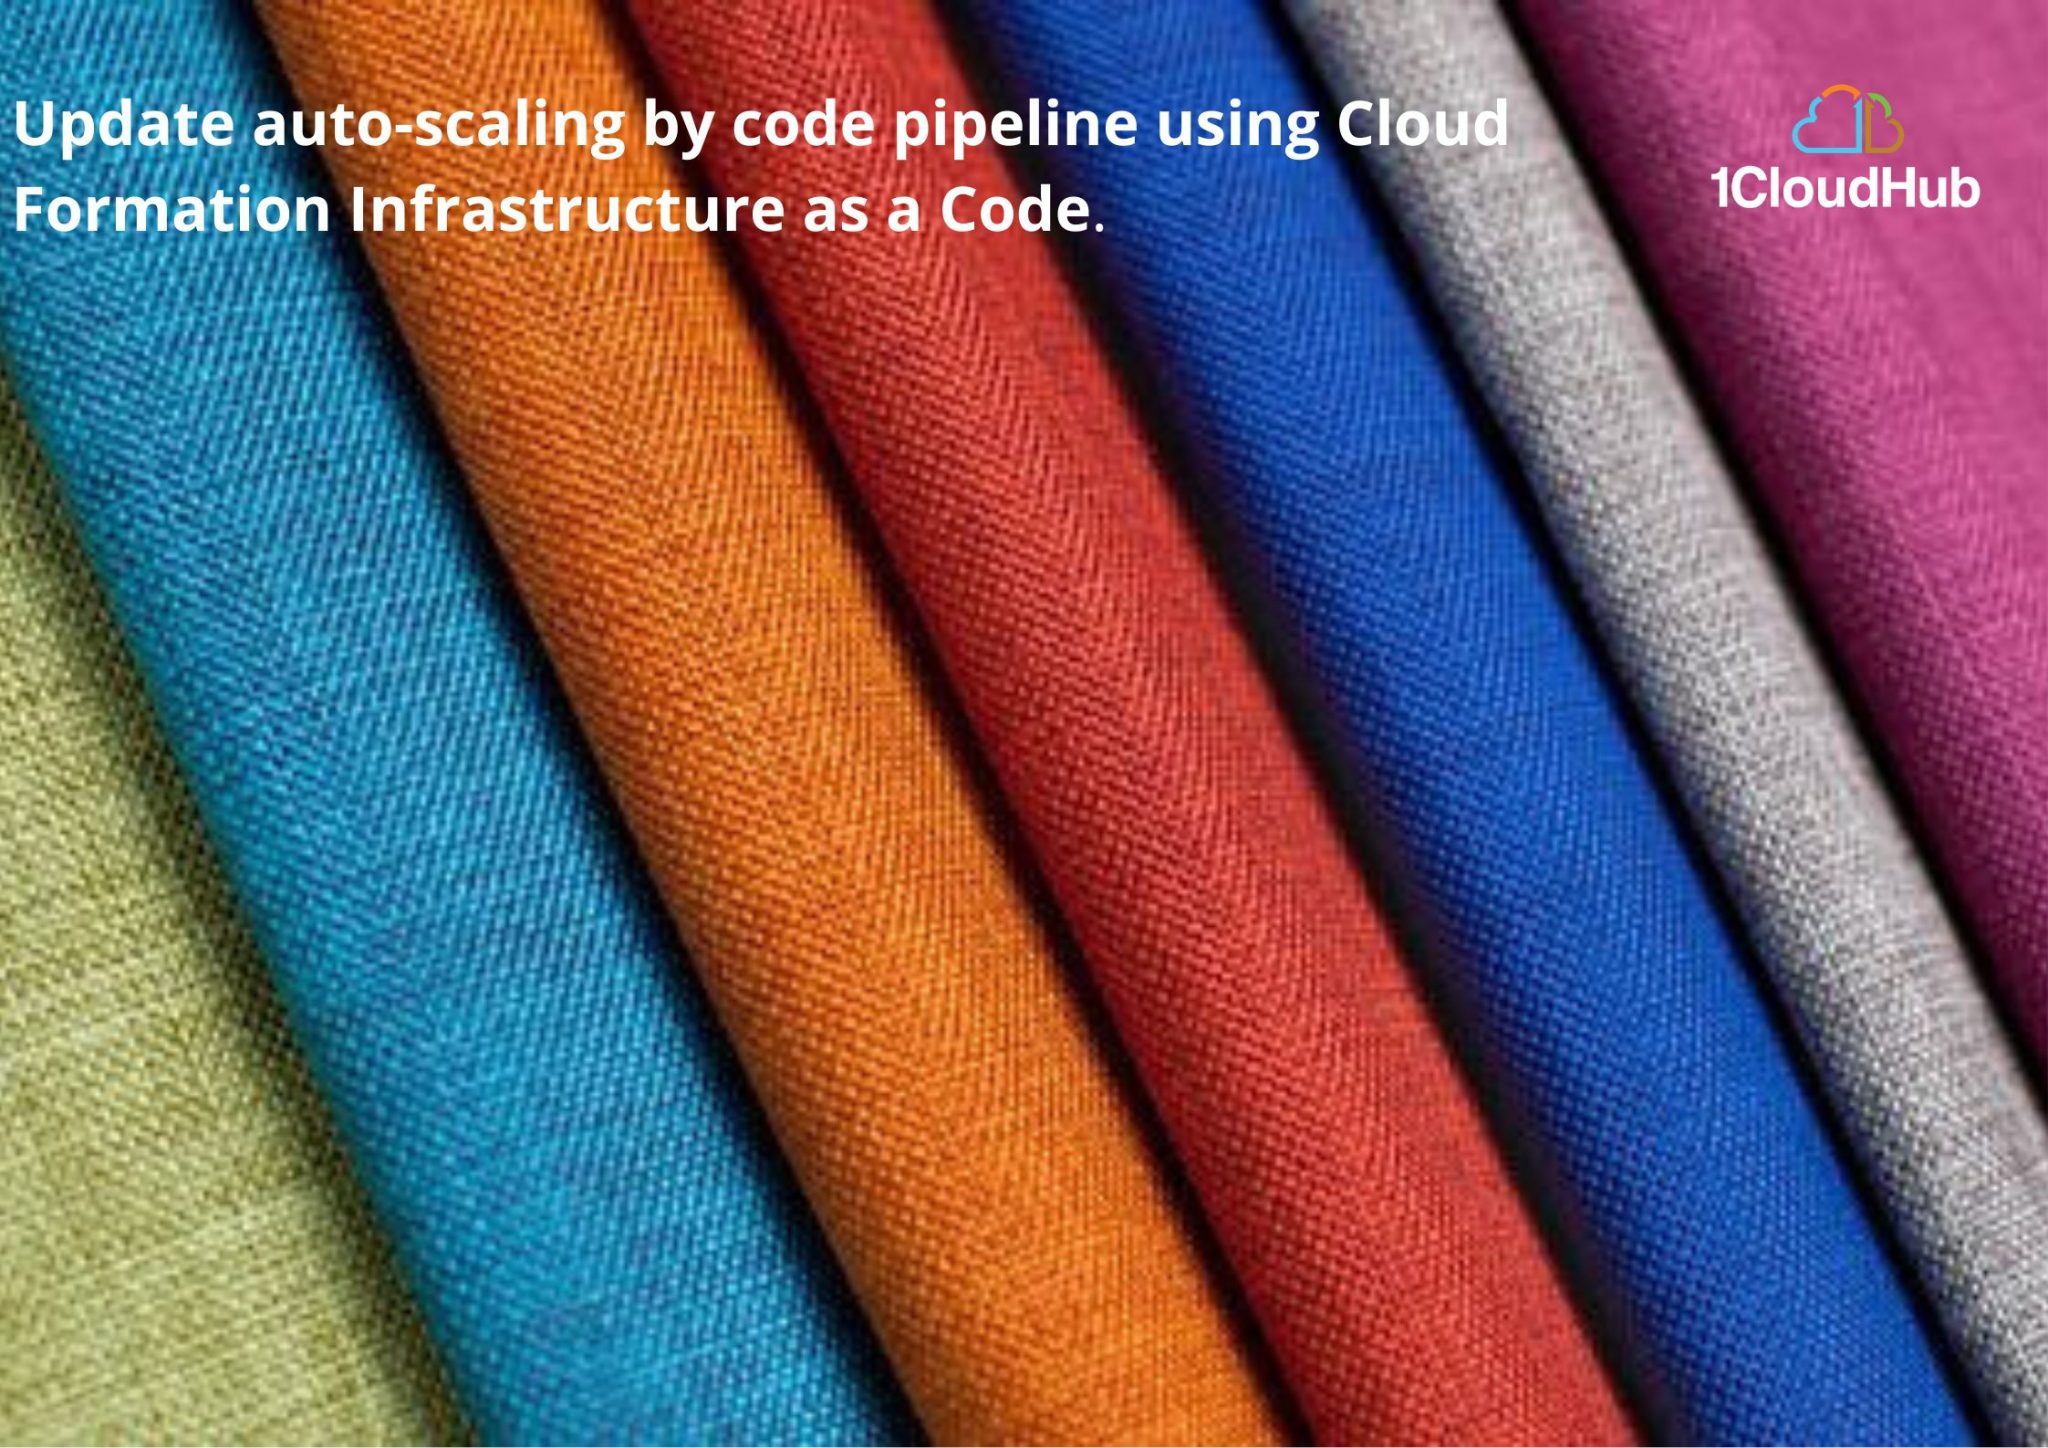 Update auto-scaling by code pipeline using Cloud Formation Infrastructure as a Code